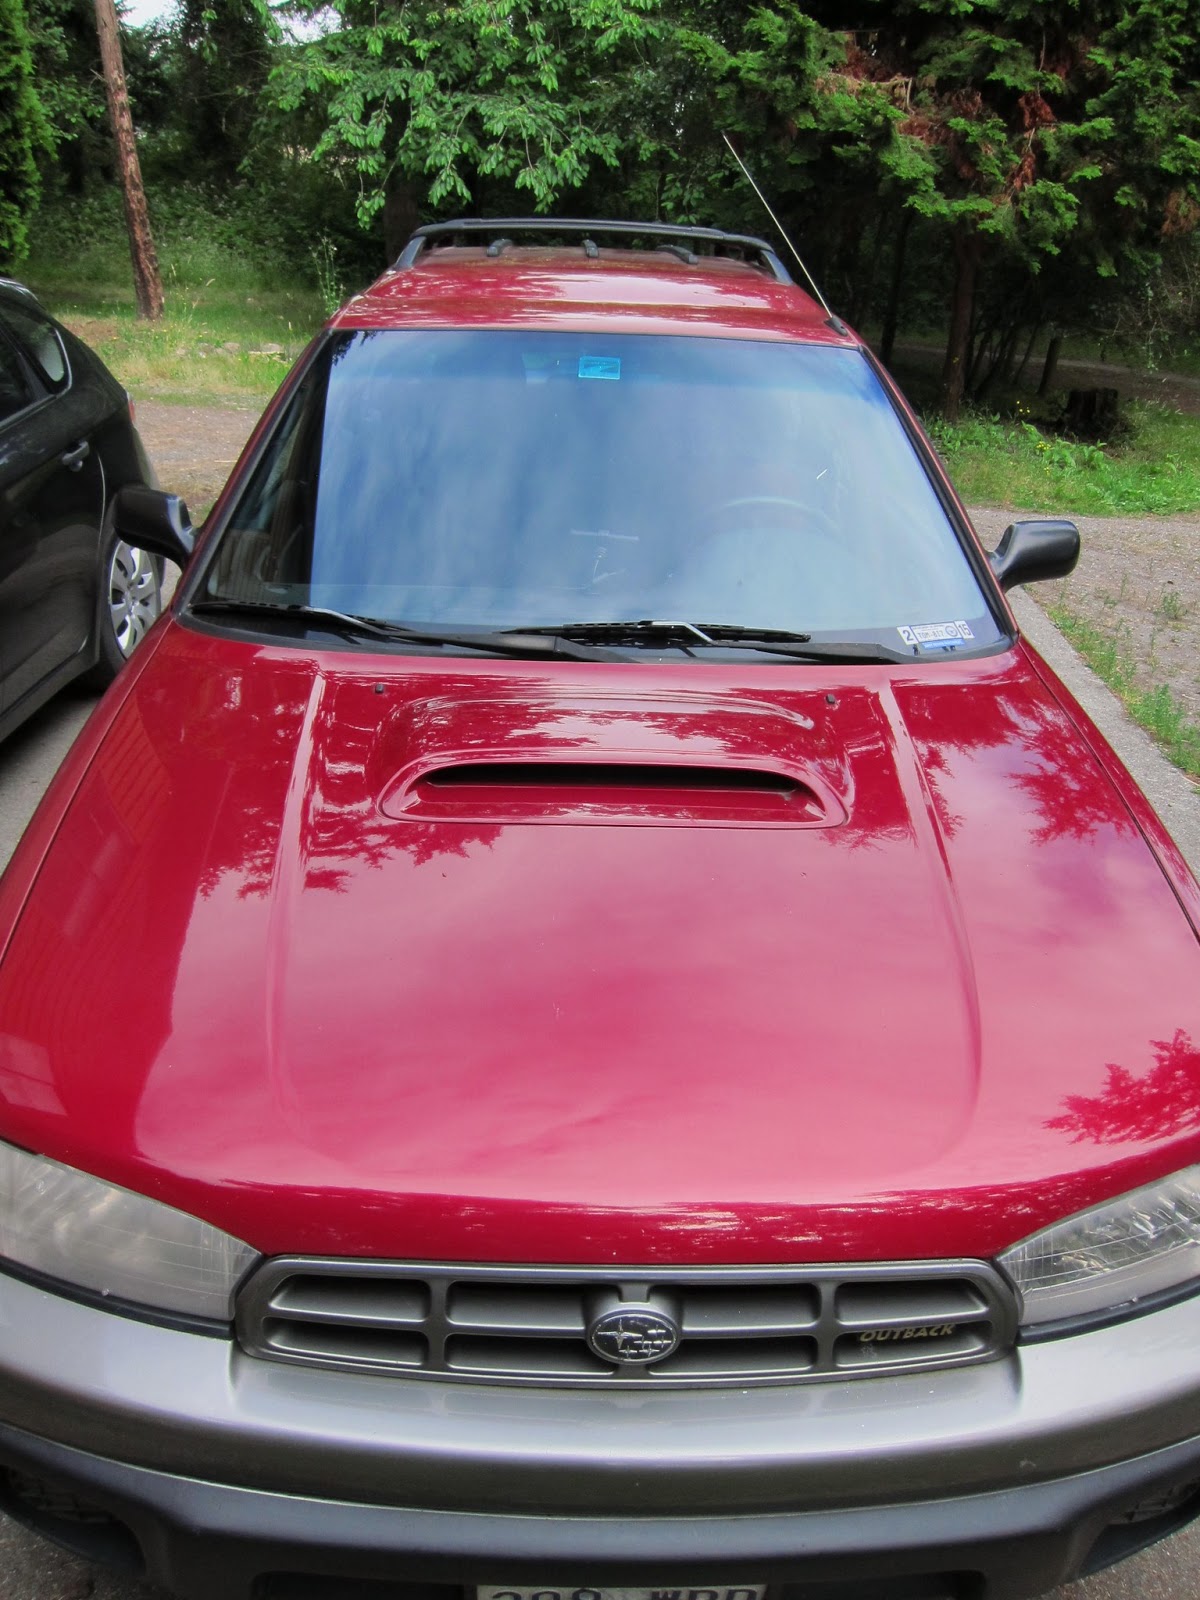 Red Crow Gear: Dual Battery system in a 1998 Subaru Legacy Outback